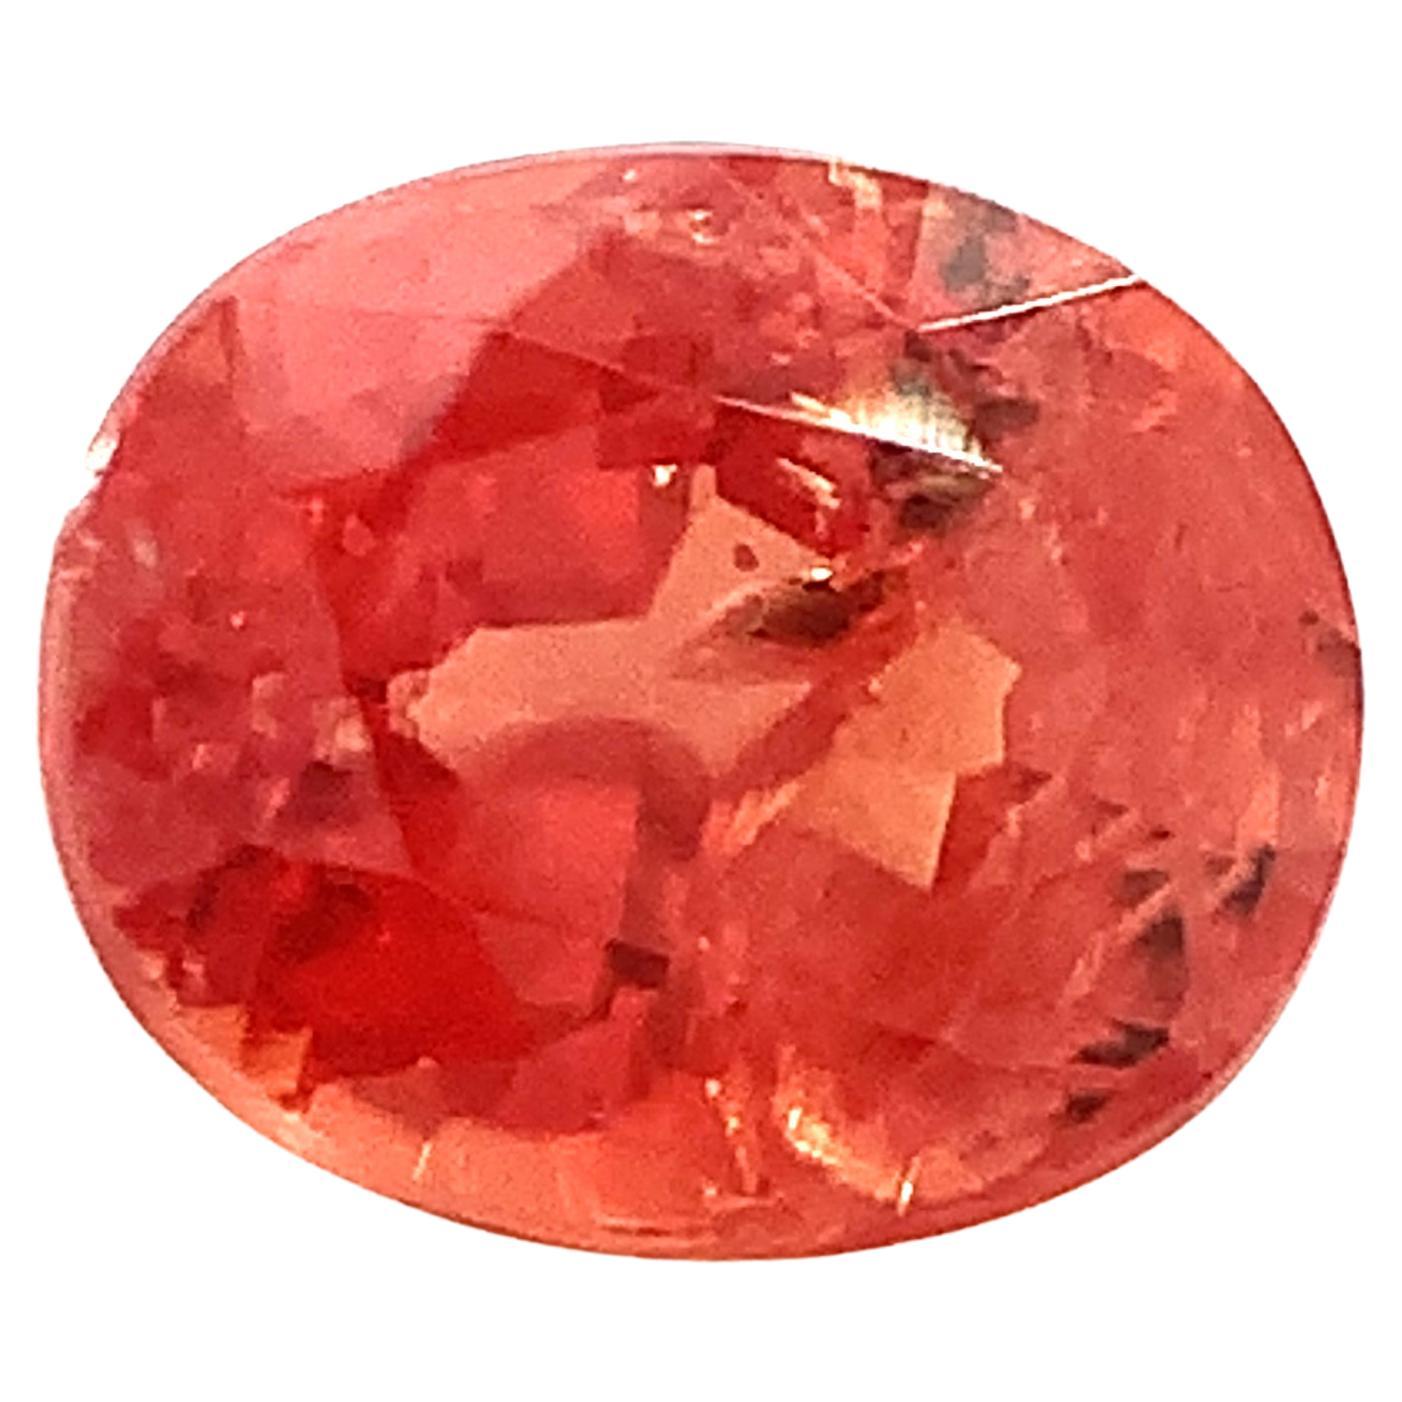 Unheated .75 Carat Padparadscha Sapphire, Unset Loose Gemstone, GIA Certified